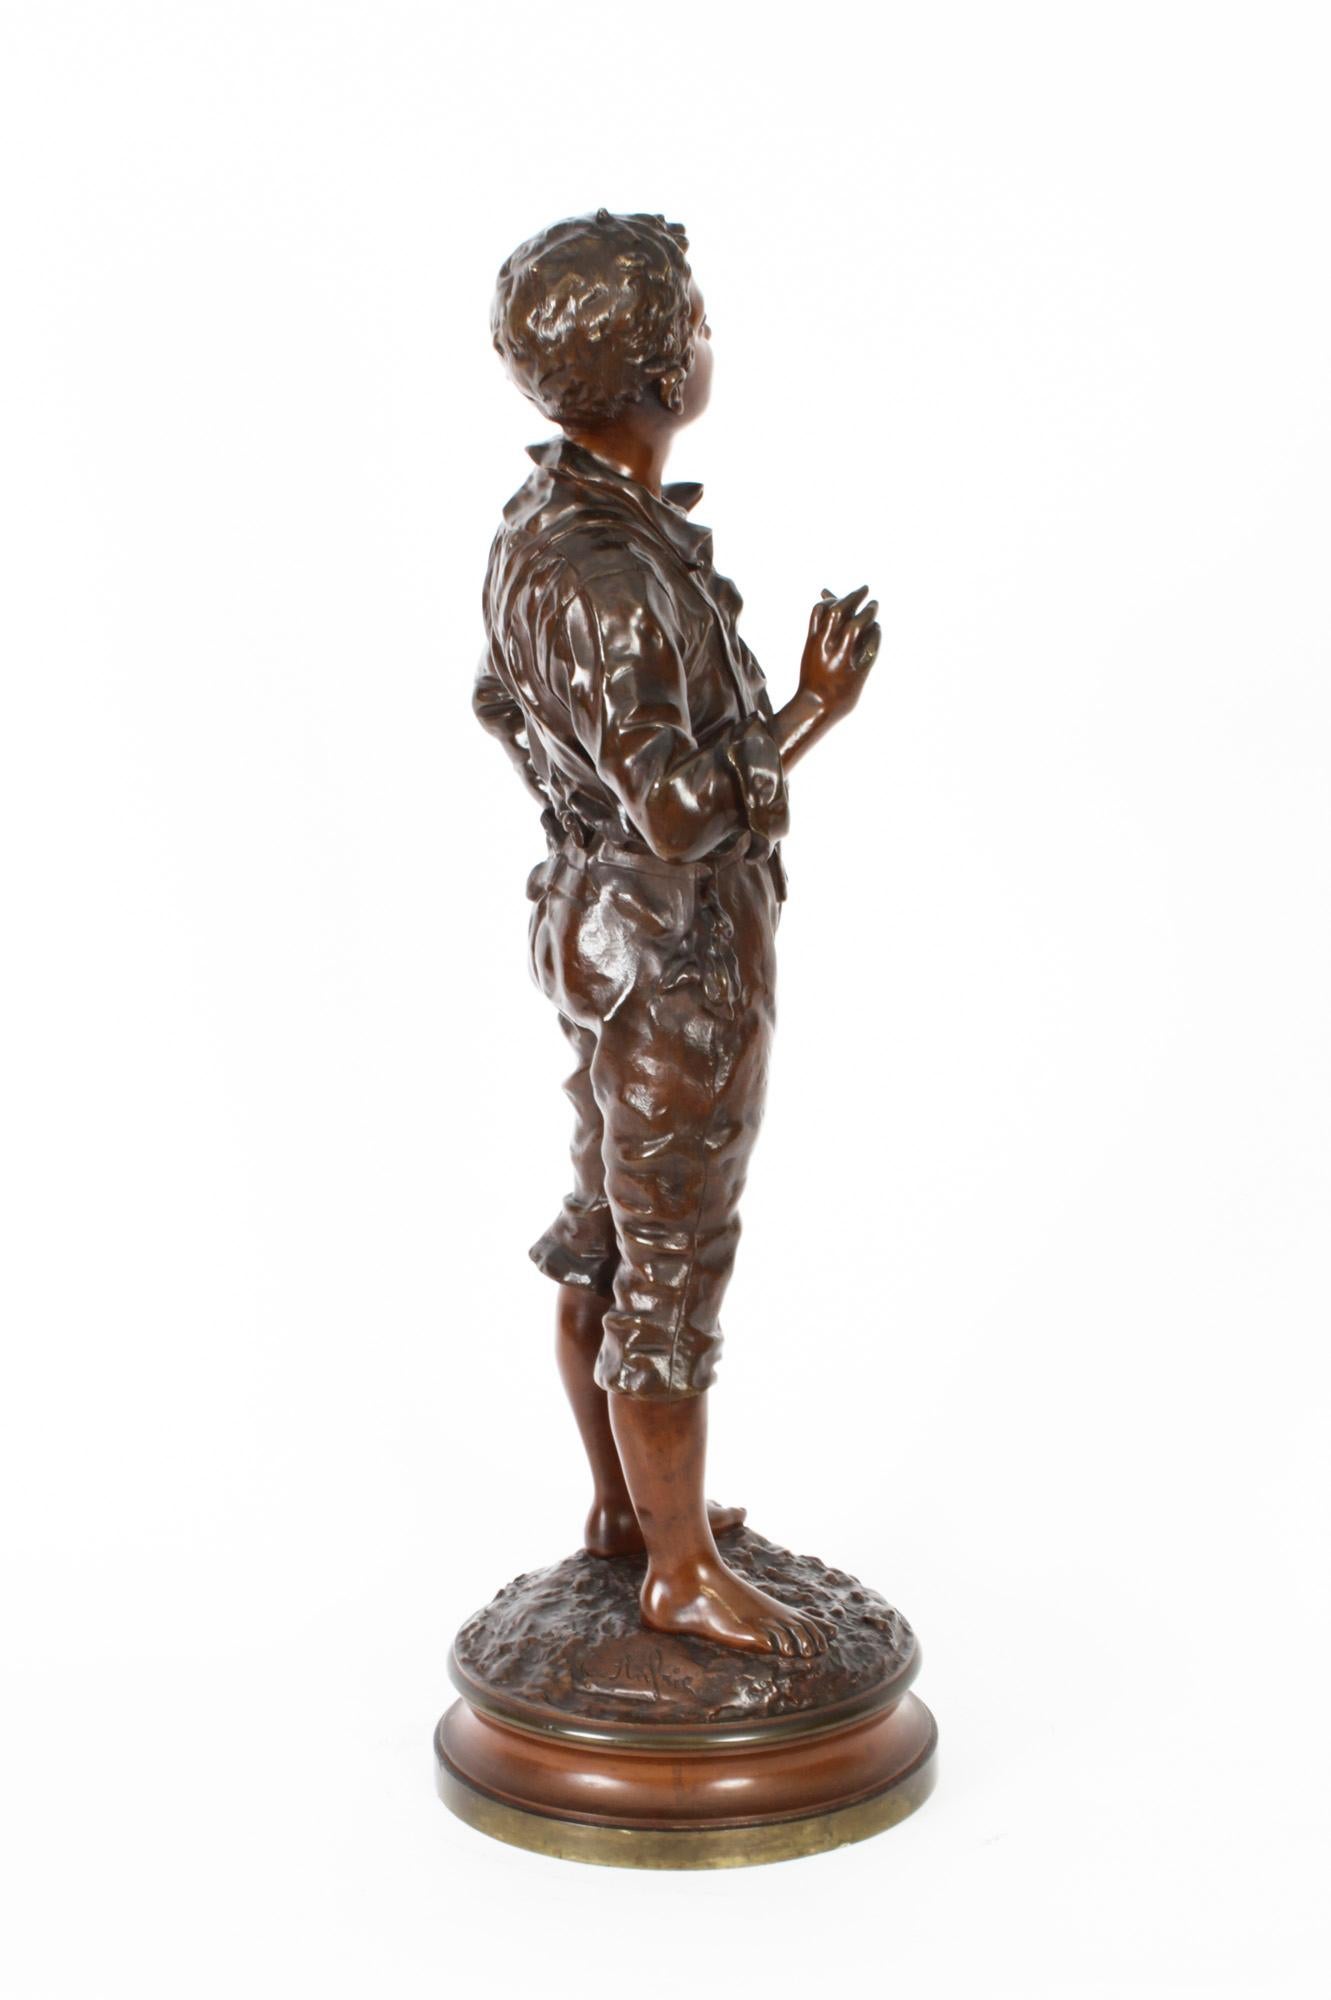 Antique Bronze Street Urchin by Charles Anfrie, 1833-1905', 19th Century For Sale 2